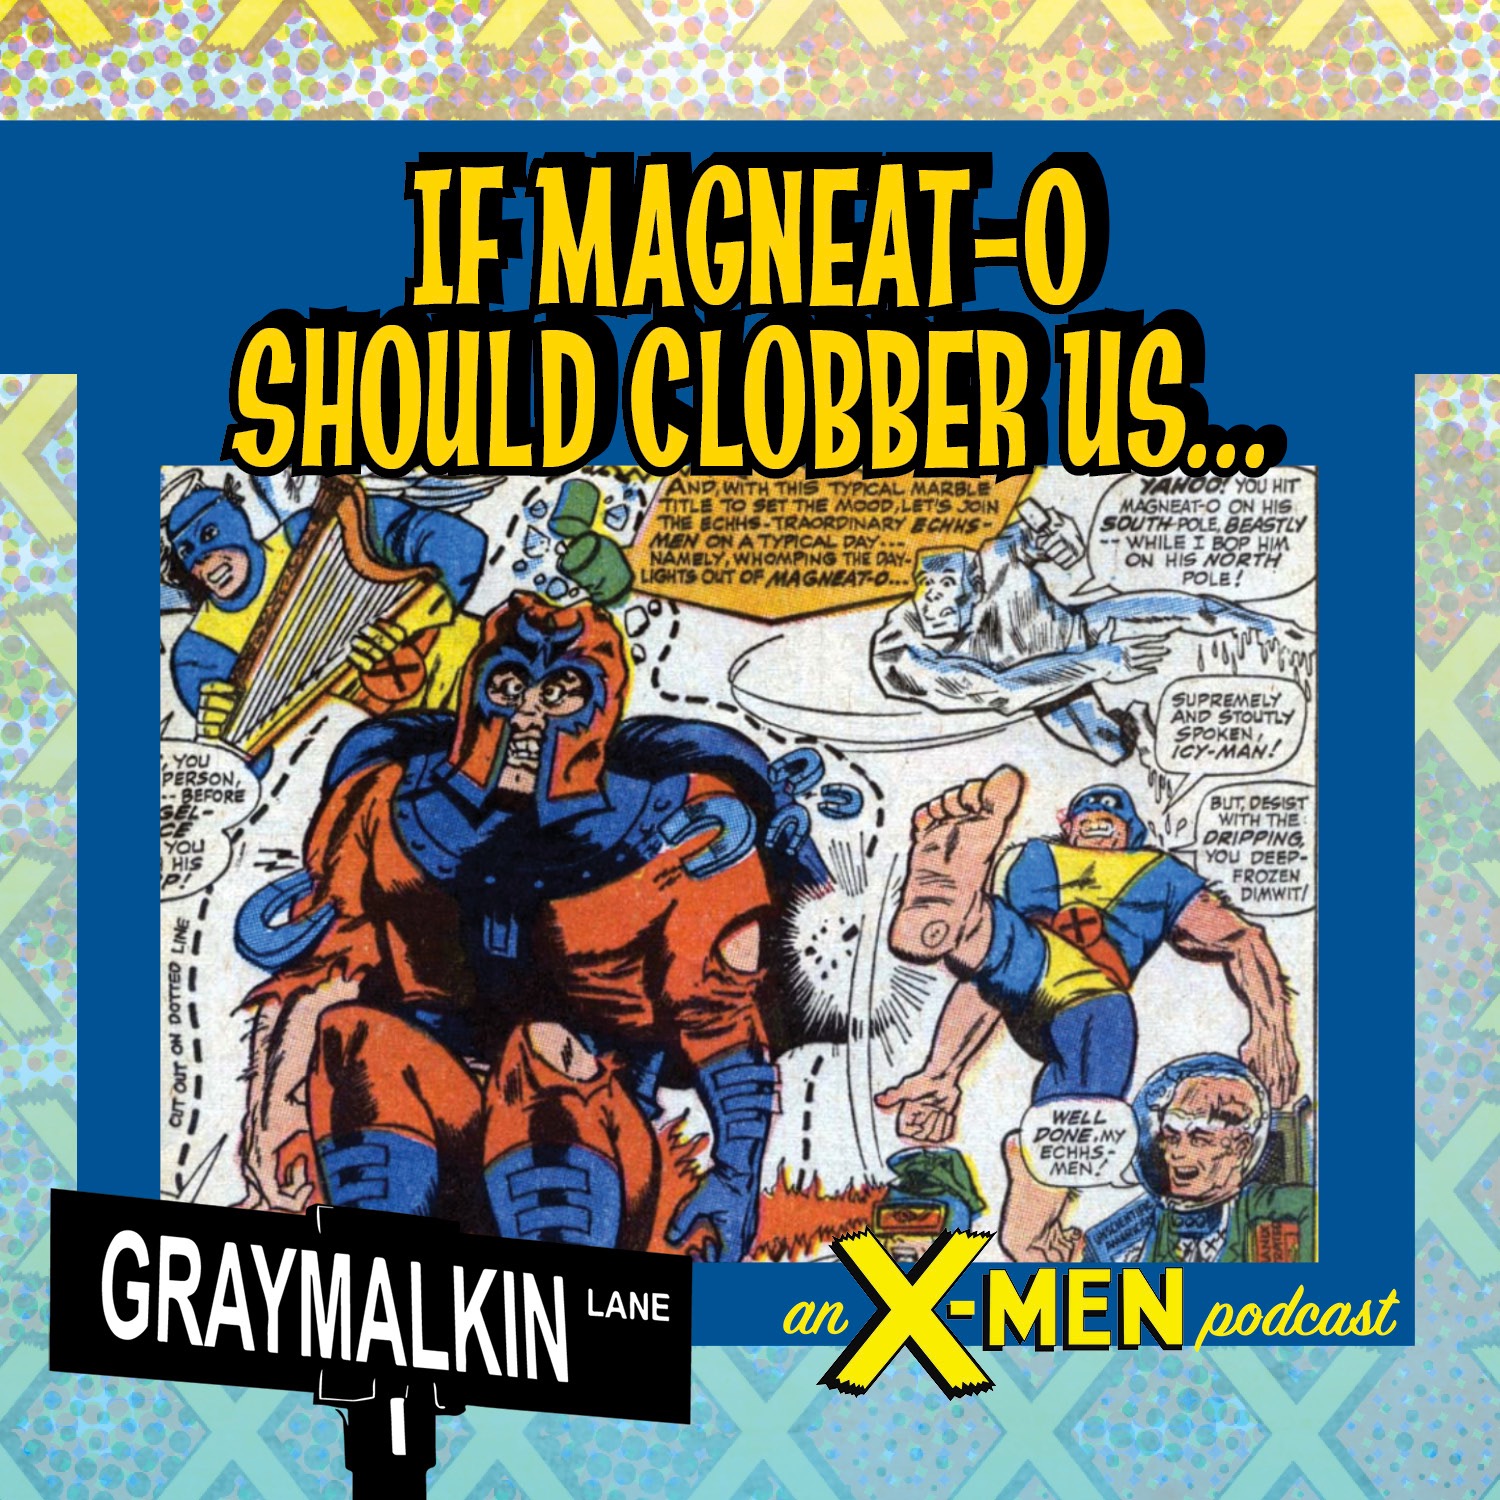 Not Brand Echh #4: If Magneat-O Should Clobber Us...! The Holiday episode! First, it’s the Roast of Scott Summers, with hilarious friends! And then a review of Not Brand Echh #4 with the Anderson Fami